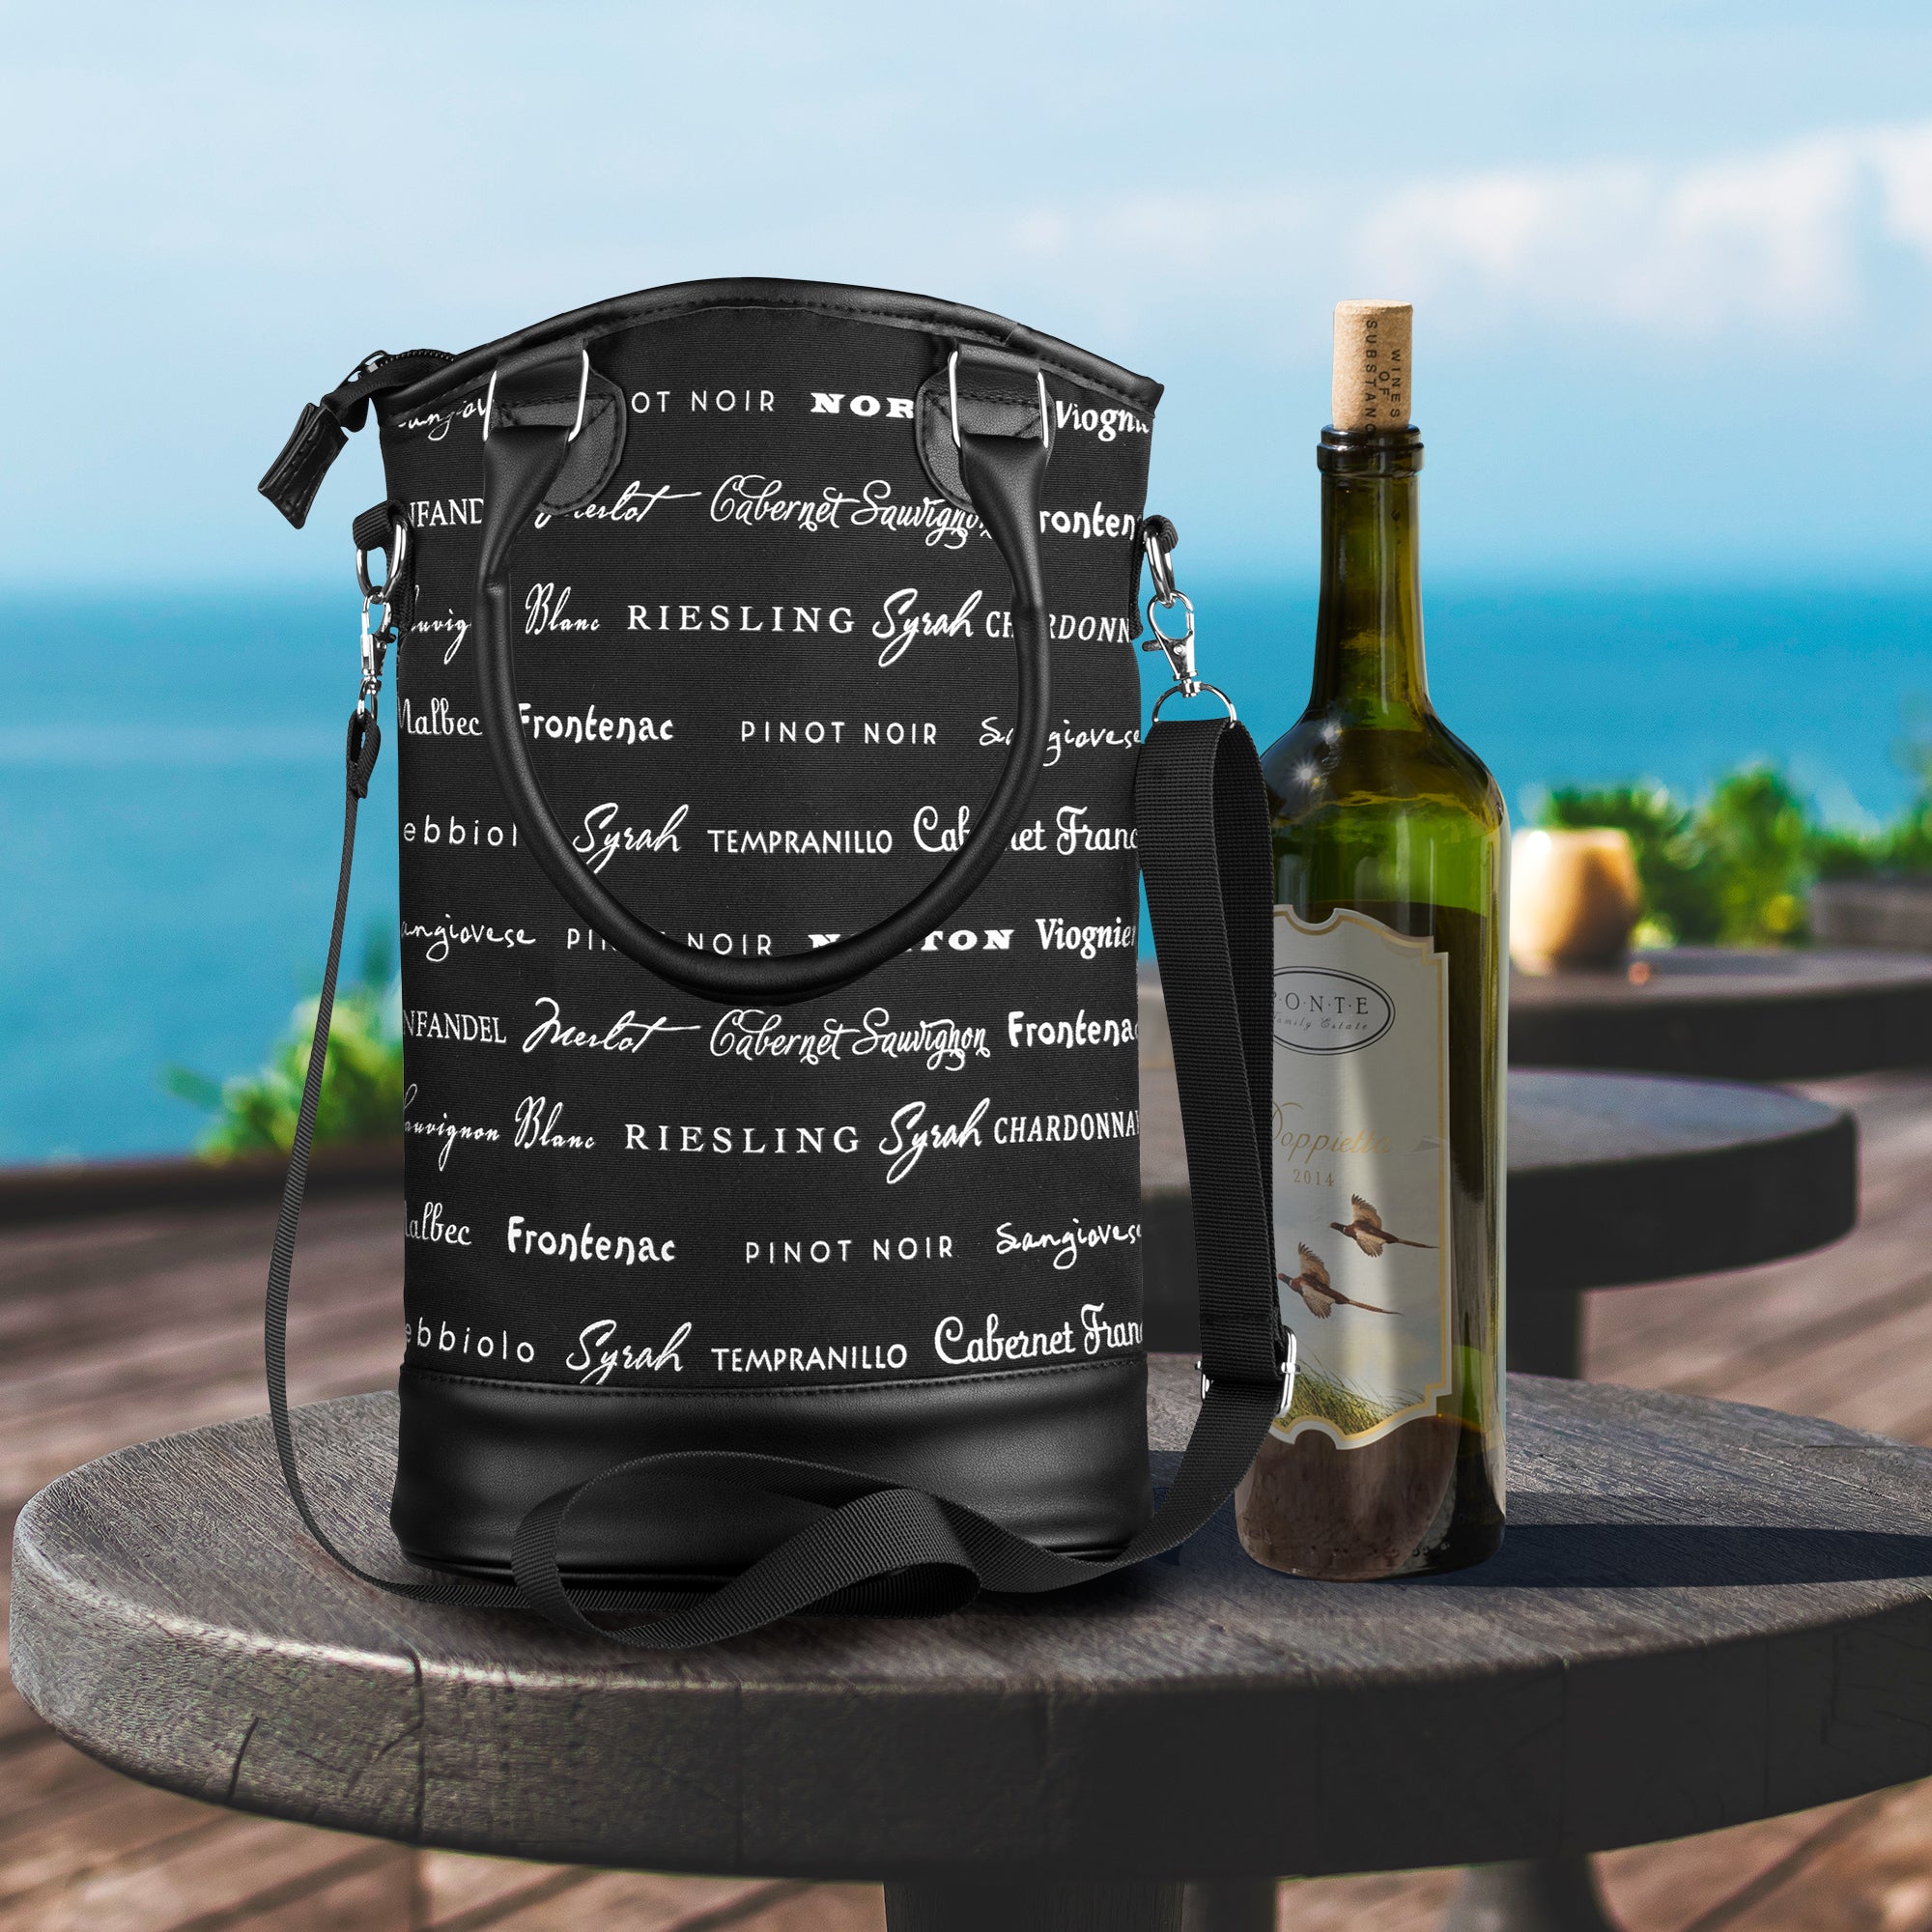 Insulated 2-Bottle Wine Picnic Cooler Bag - Not Personalzied by Wine Enthusiast